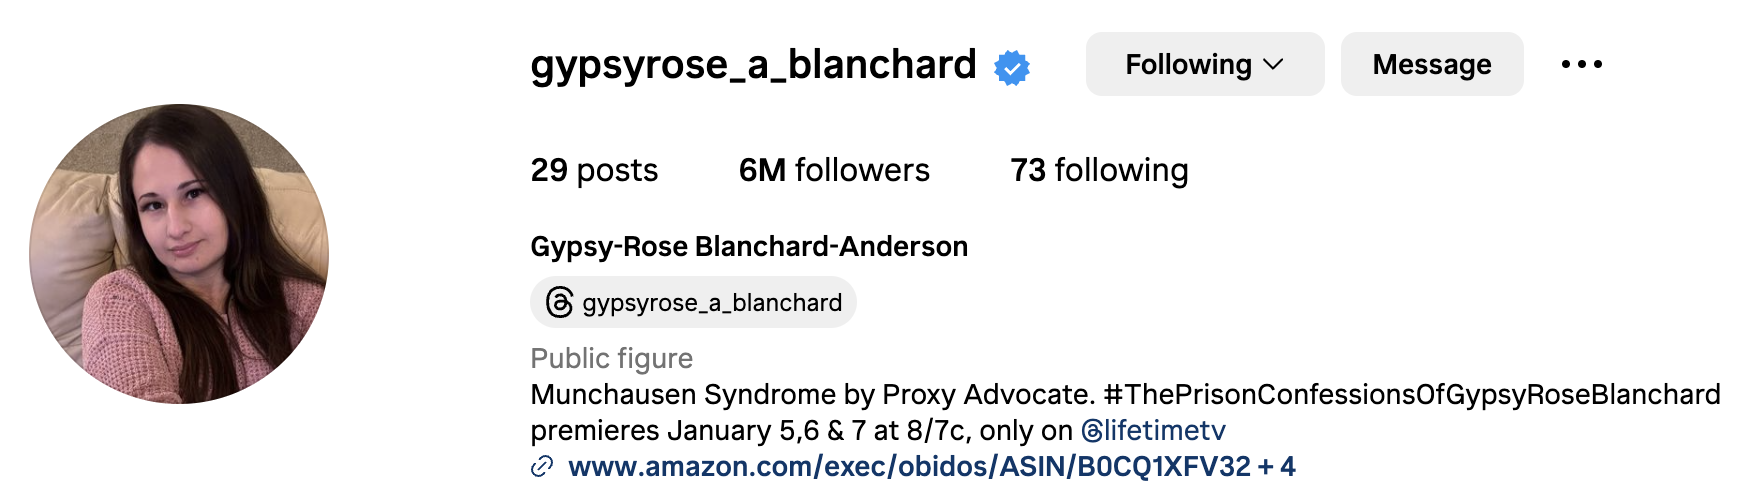 her profile with 6 million followers